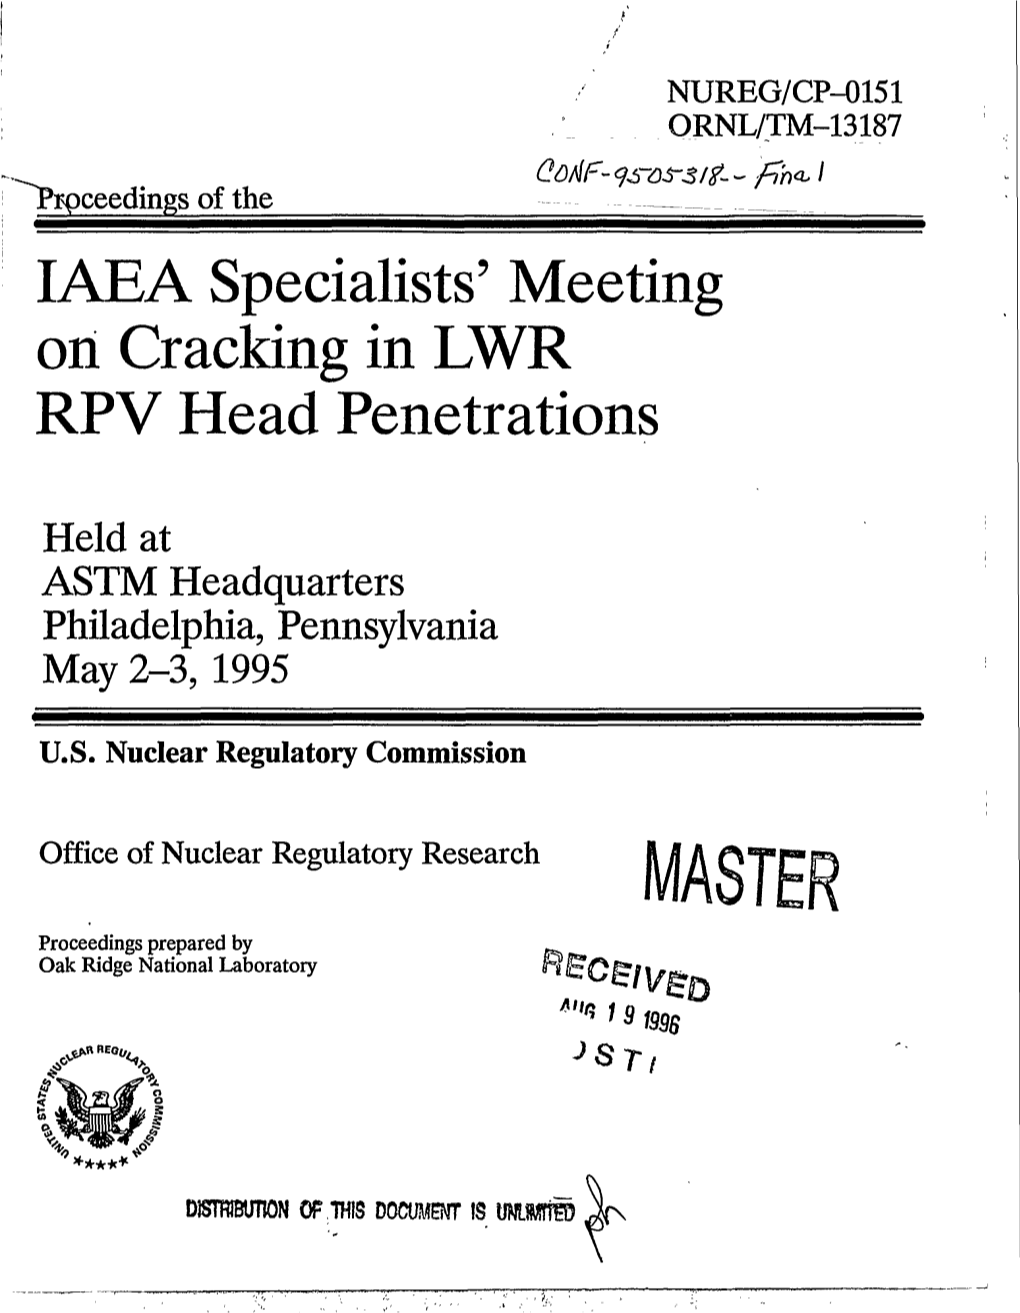 IAEA Specialists' Meeting on Cracking in LWR RPV Head Penetrations